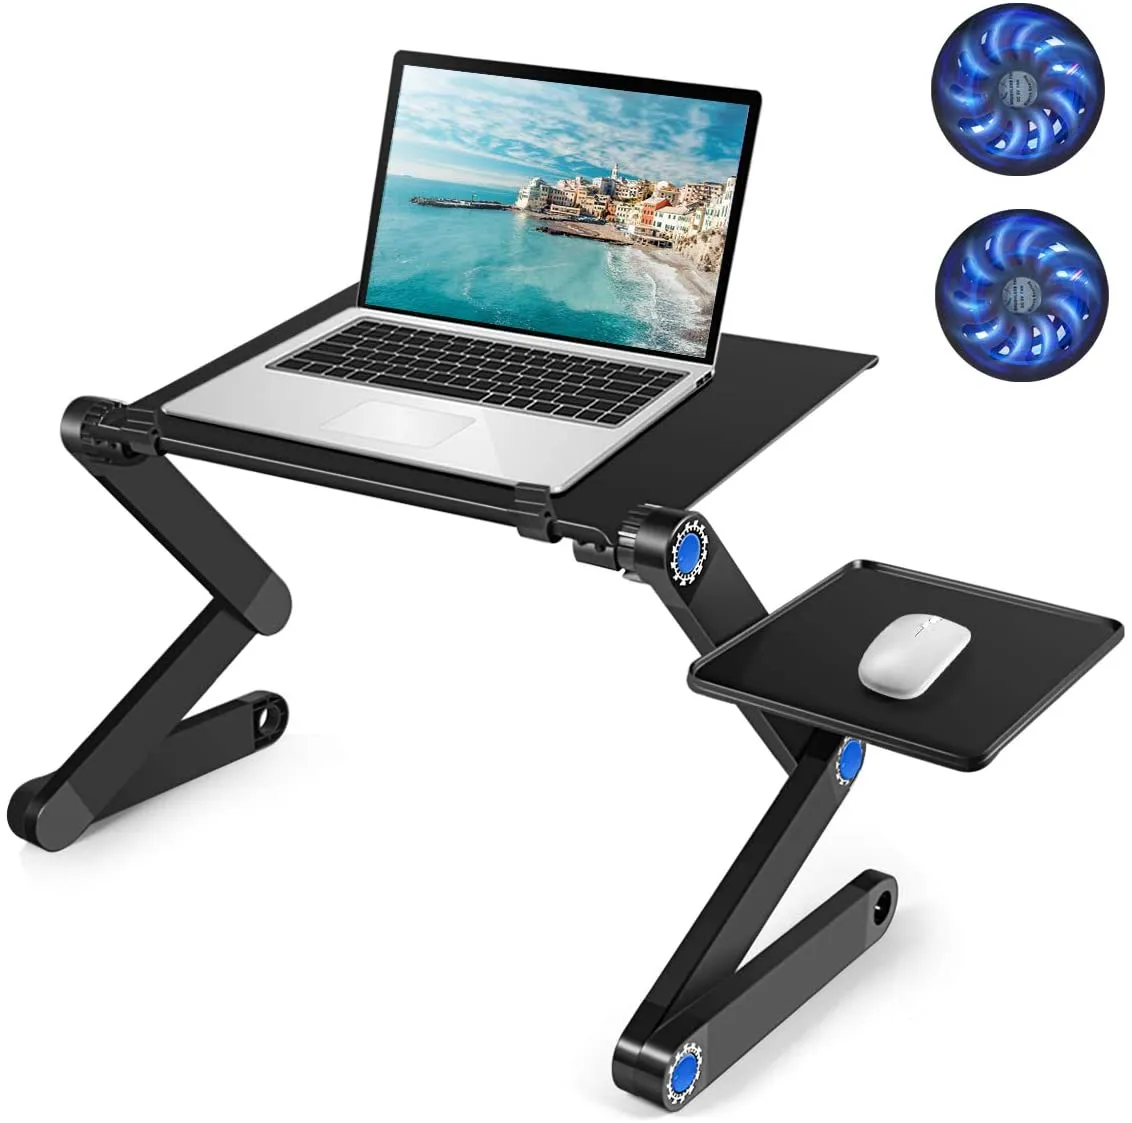 Adjustable and portable laptop stand.